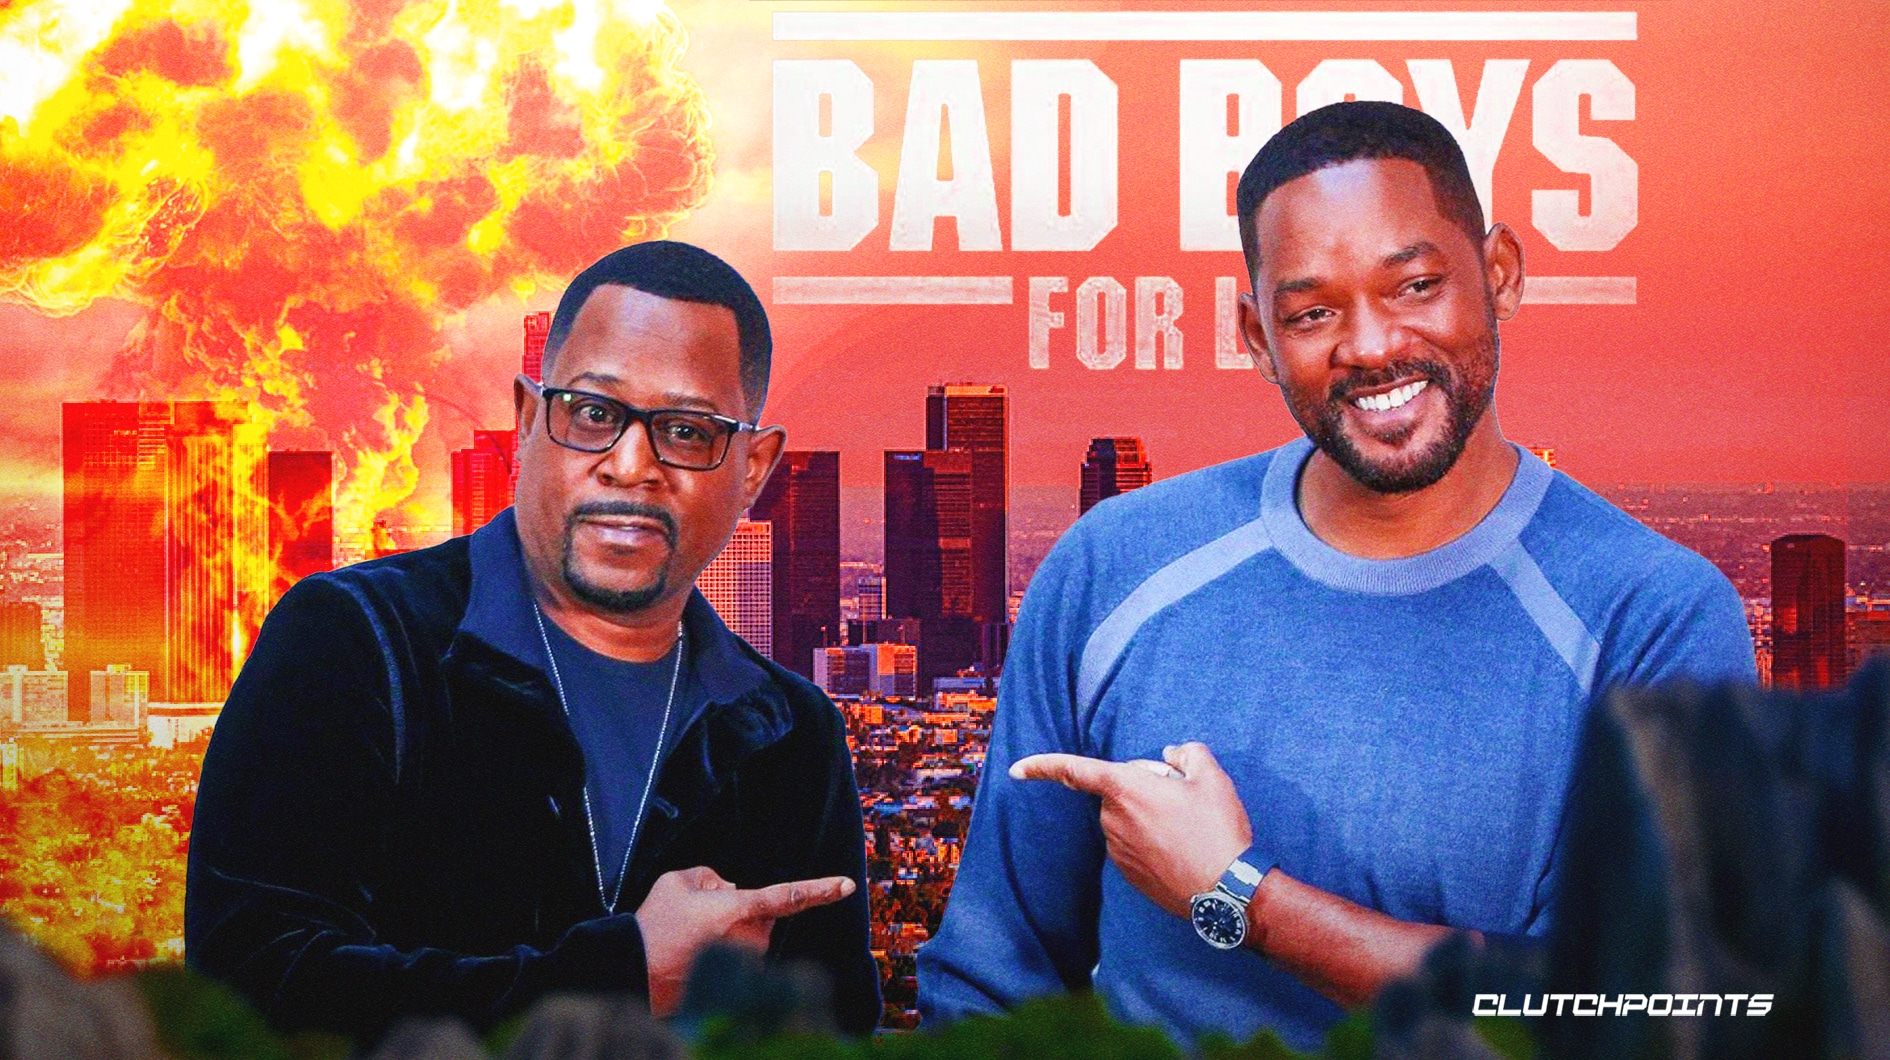 Bad Boys for Life, Martin Lawrence, Will Smith